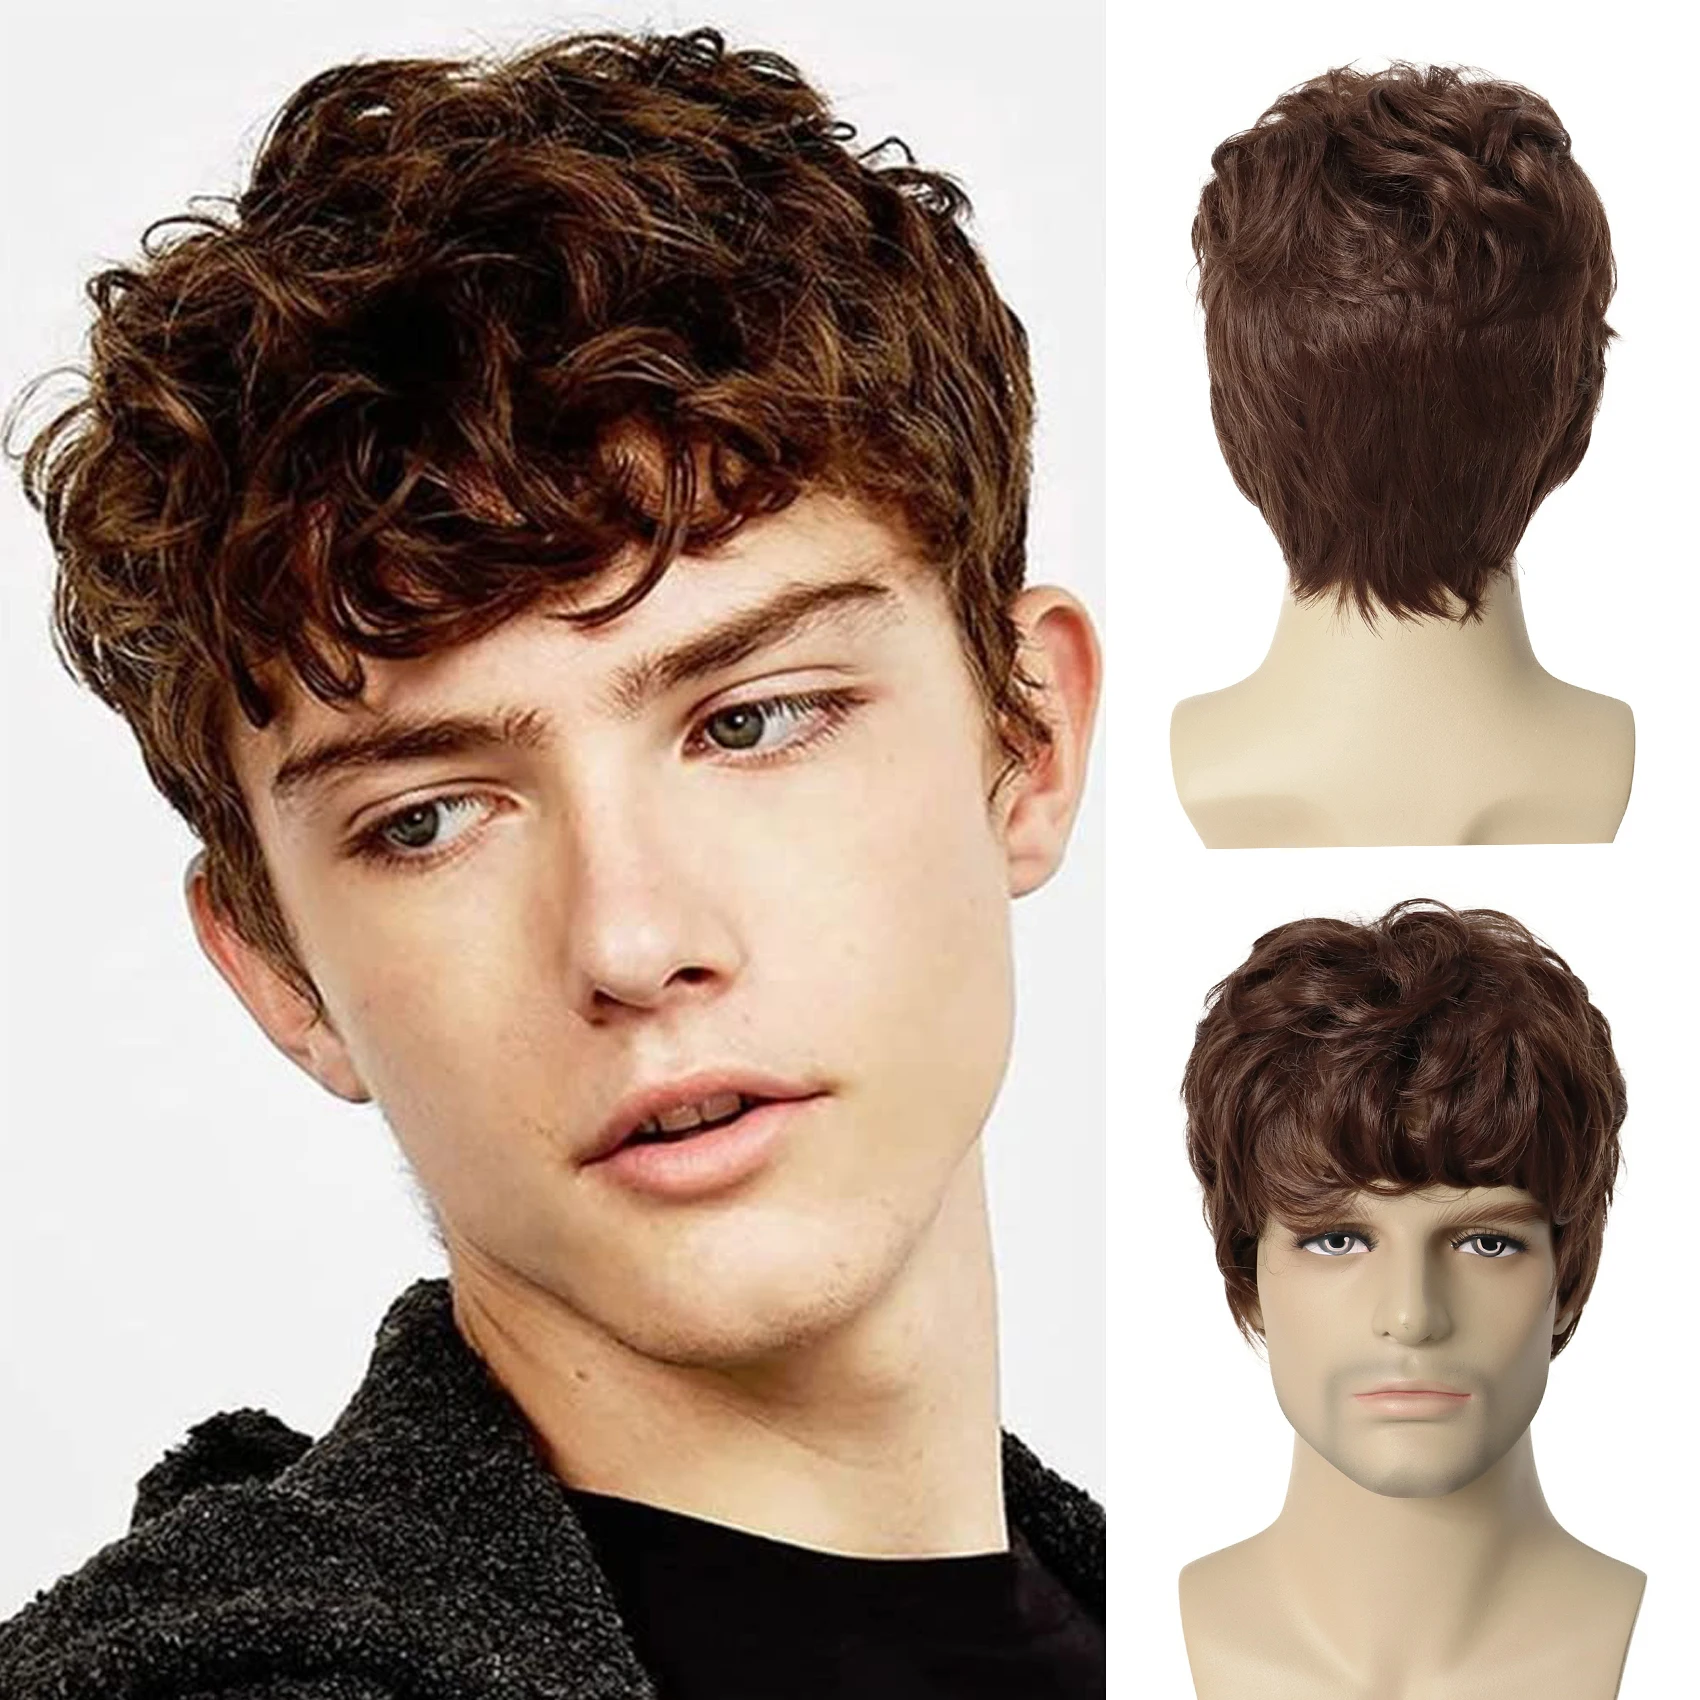 

GNIMEGIL Synthetic Wigs for Men Short Brown Wig Curly Hair for Man Guy Natural Wig Curly Korean Hairstyles Brunette Boy Wigs